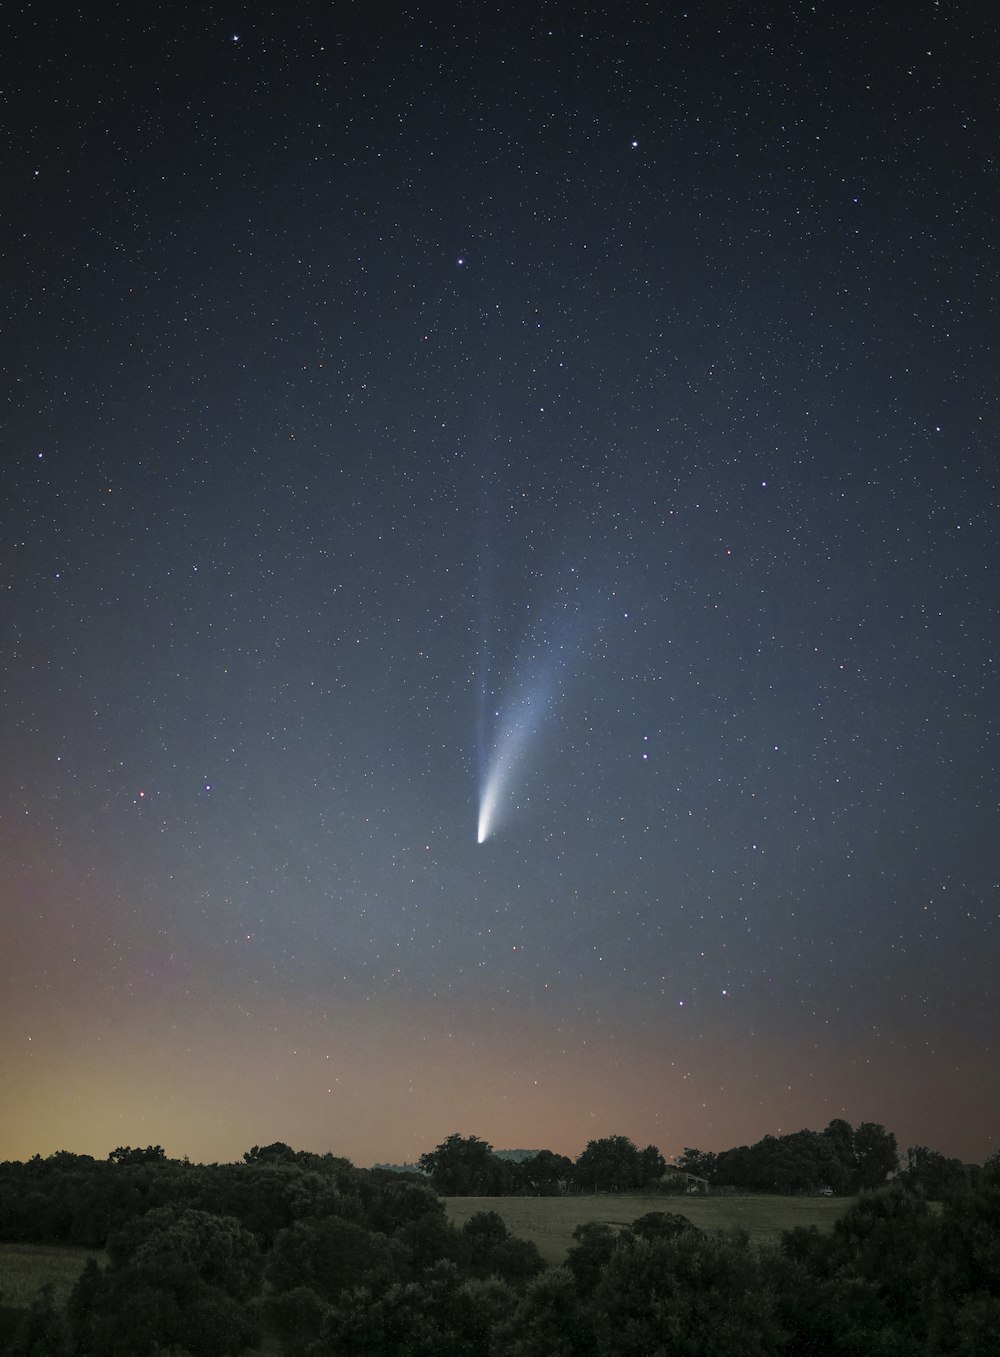 a bright comet shines in the night sky